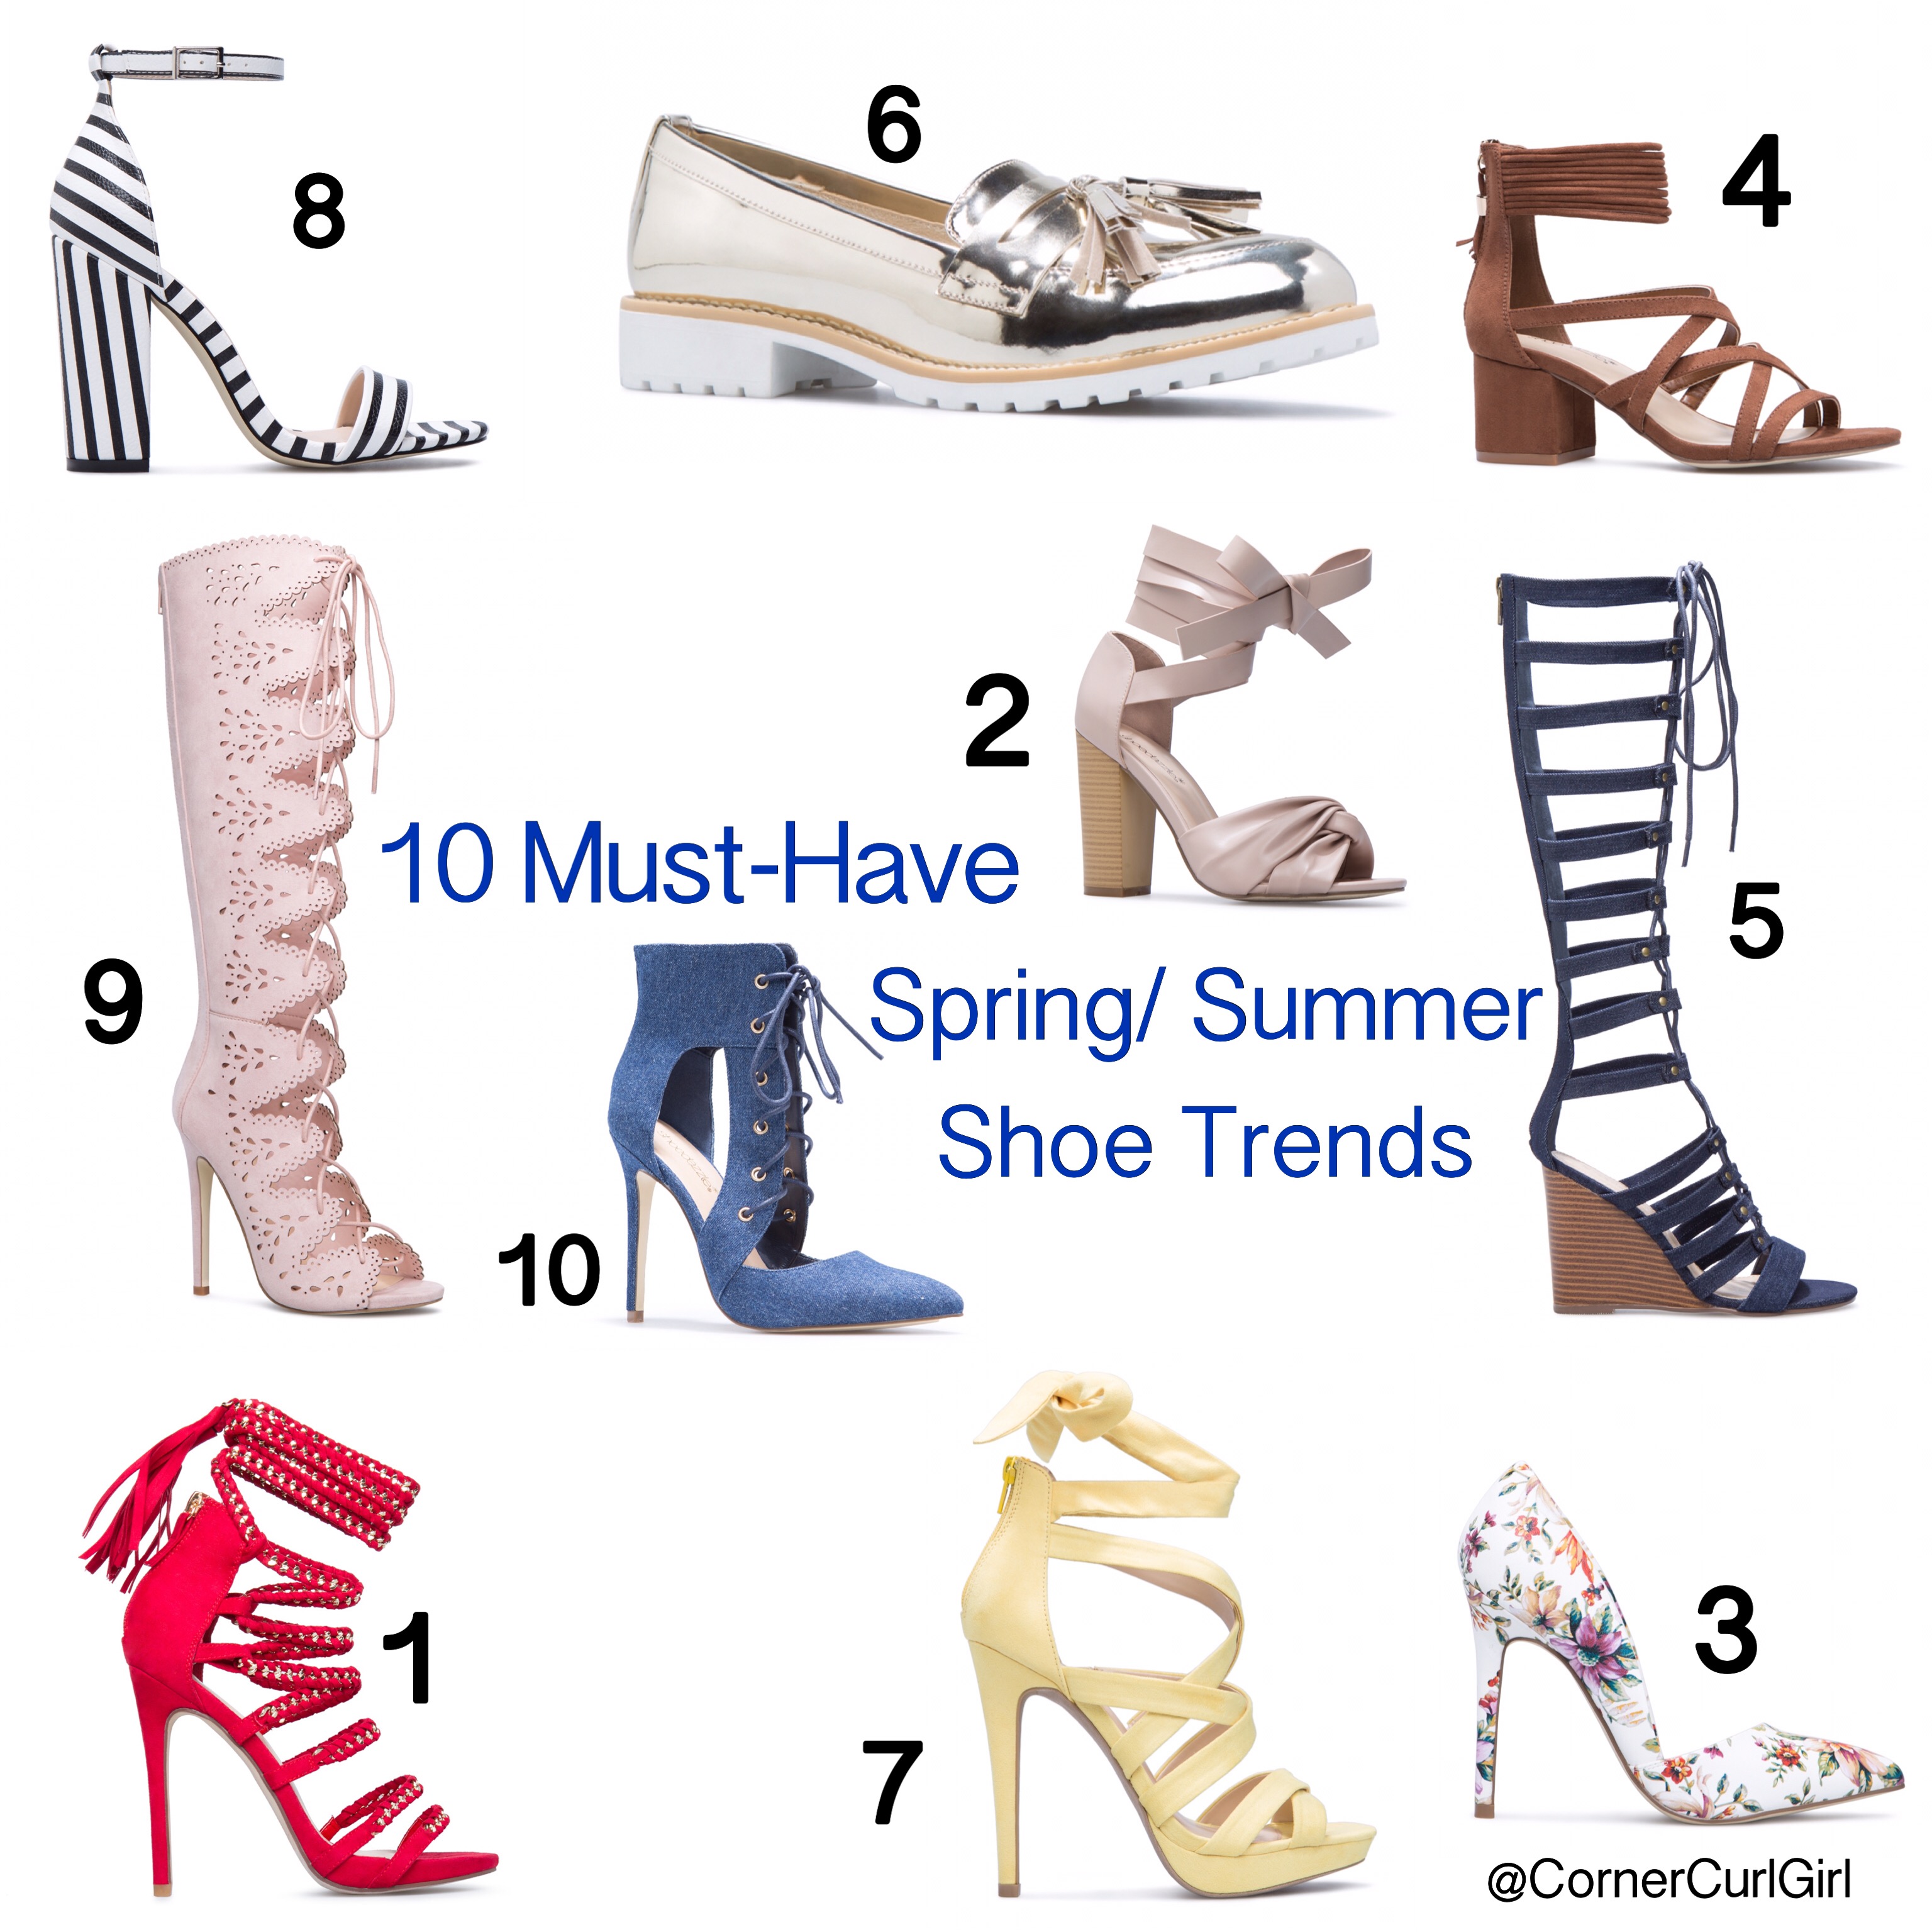 I Think Every Shoe Style Goes With This Sharp Spring Trend — The